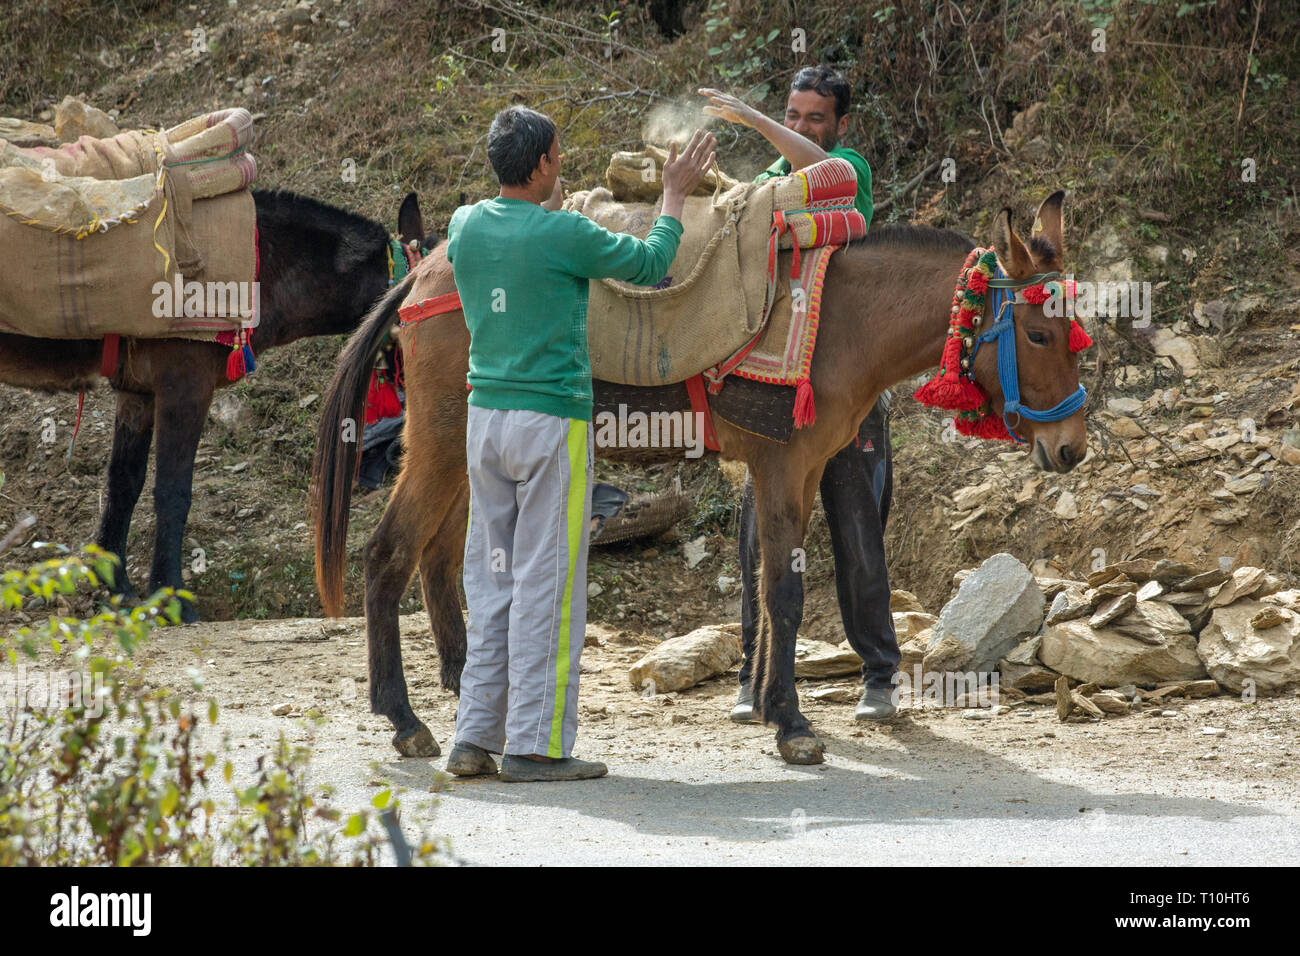 Mule, the result of cross-breeding between a horse (Equus caballus), and a donkey (Equus asinus), being used as a pack animal for carrying broken stone for building. Northern India. Stock Photo